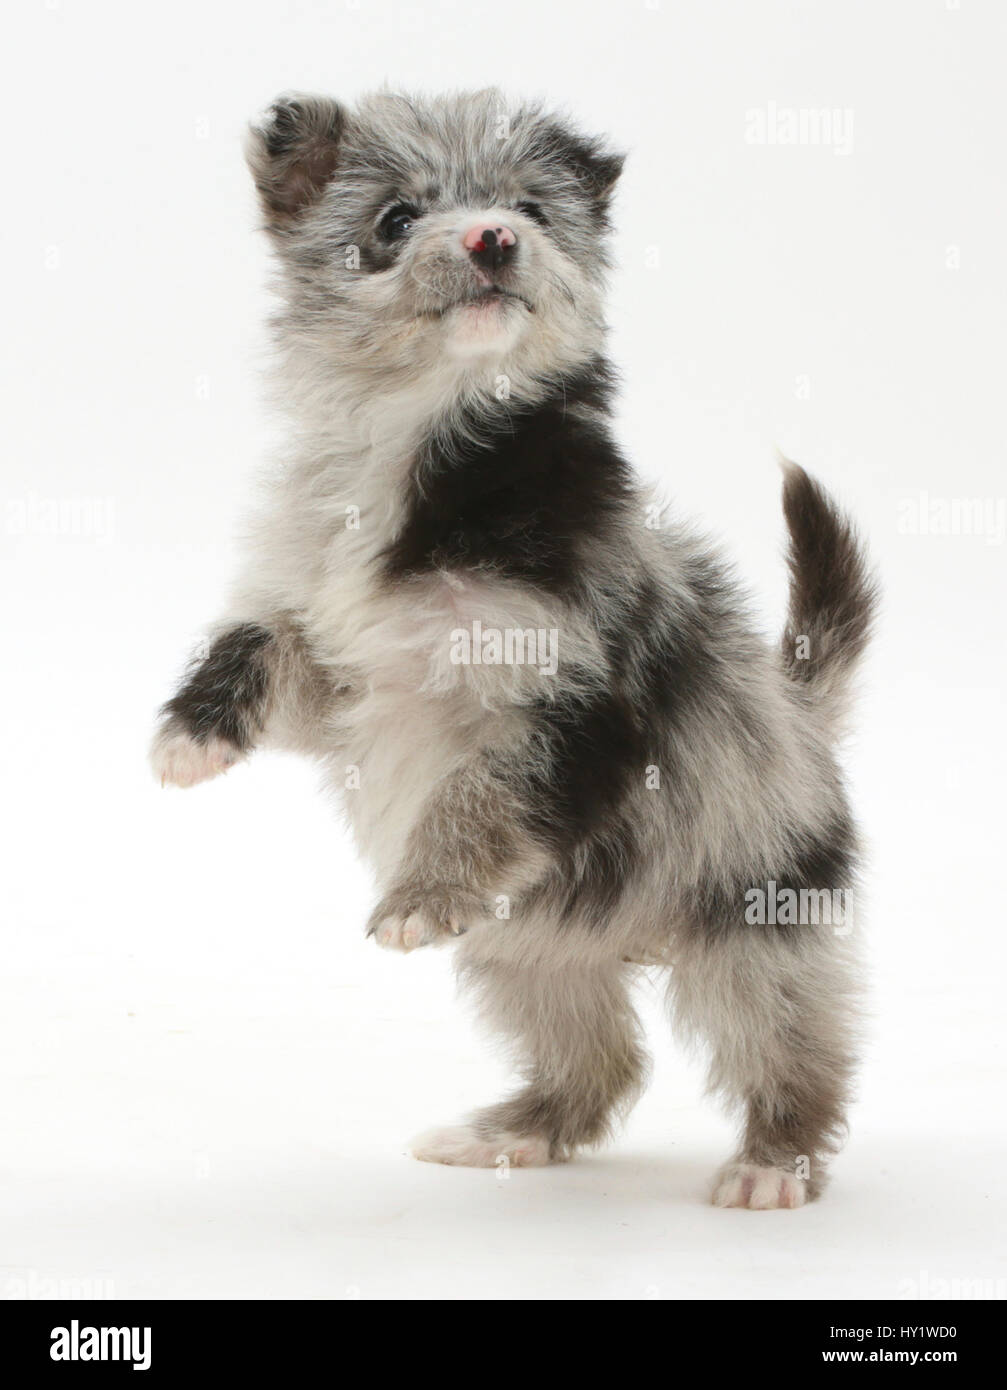 ChiPoo puppy, Chihuahua cross Poodle, Roxy, age 12 weeks, standing on hind legs. Stock Photo